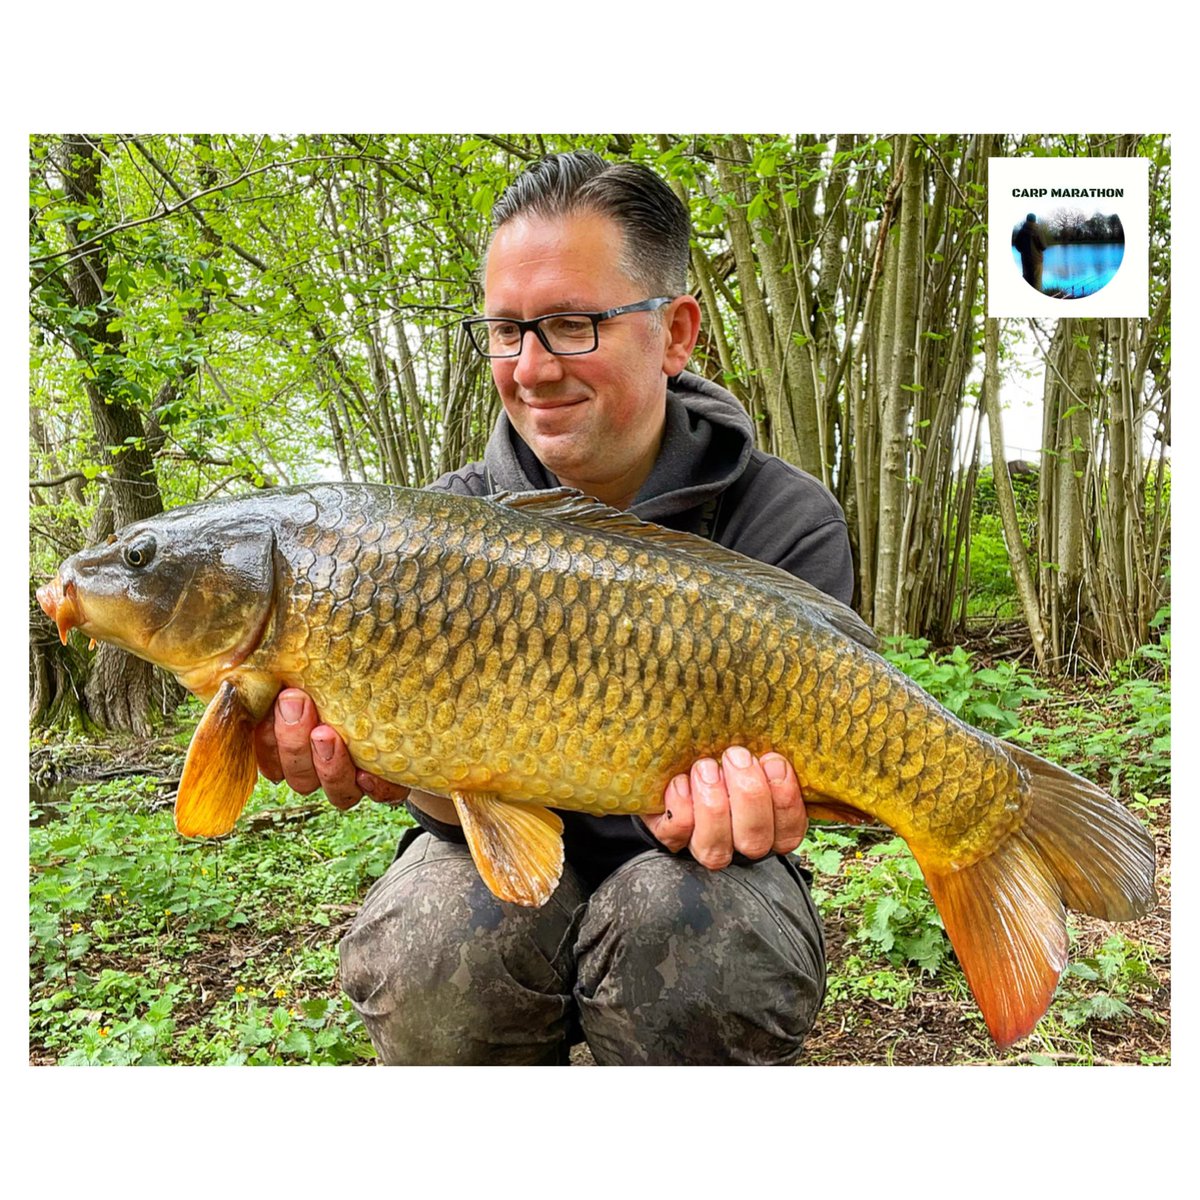 Another bar of gold

from Wednesday’s <b>Session</b> 

#CarpFishing https://t.co/ygKoLggIos